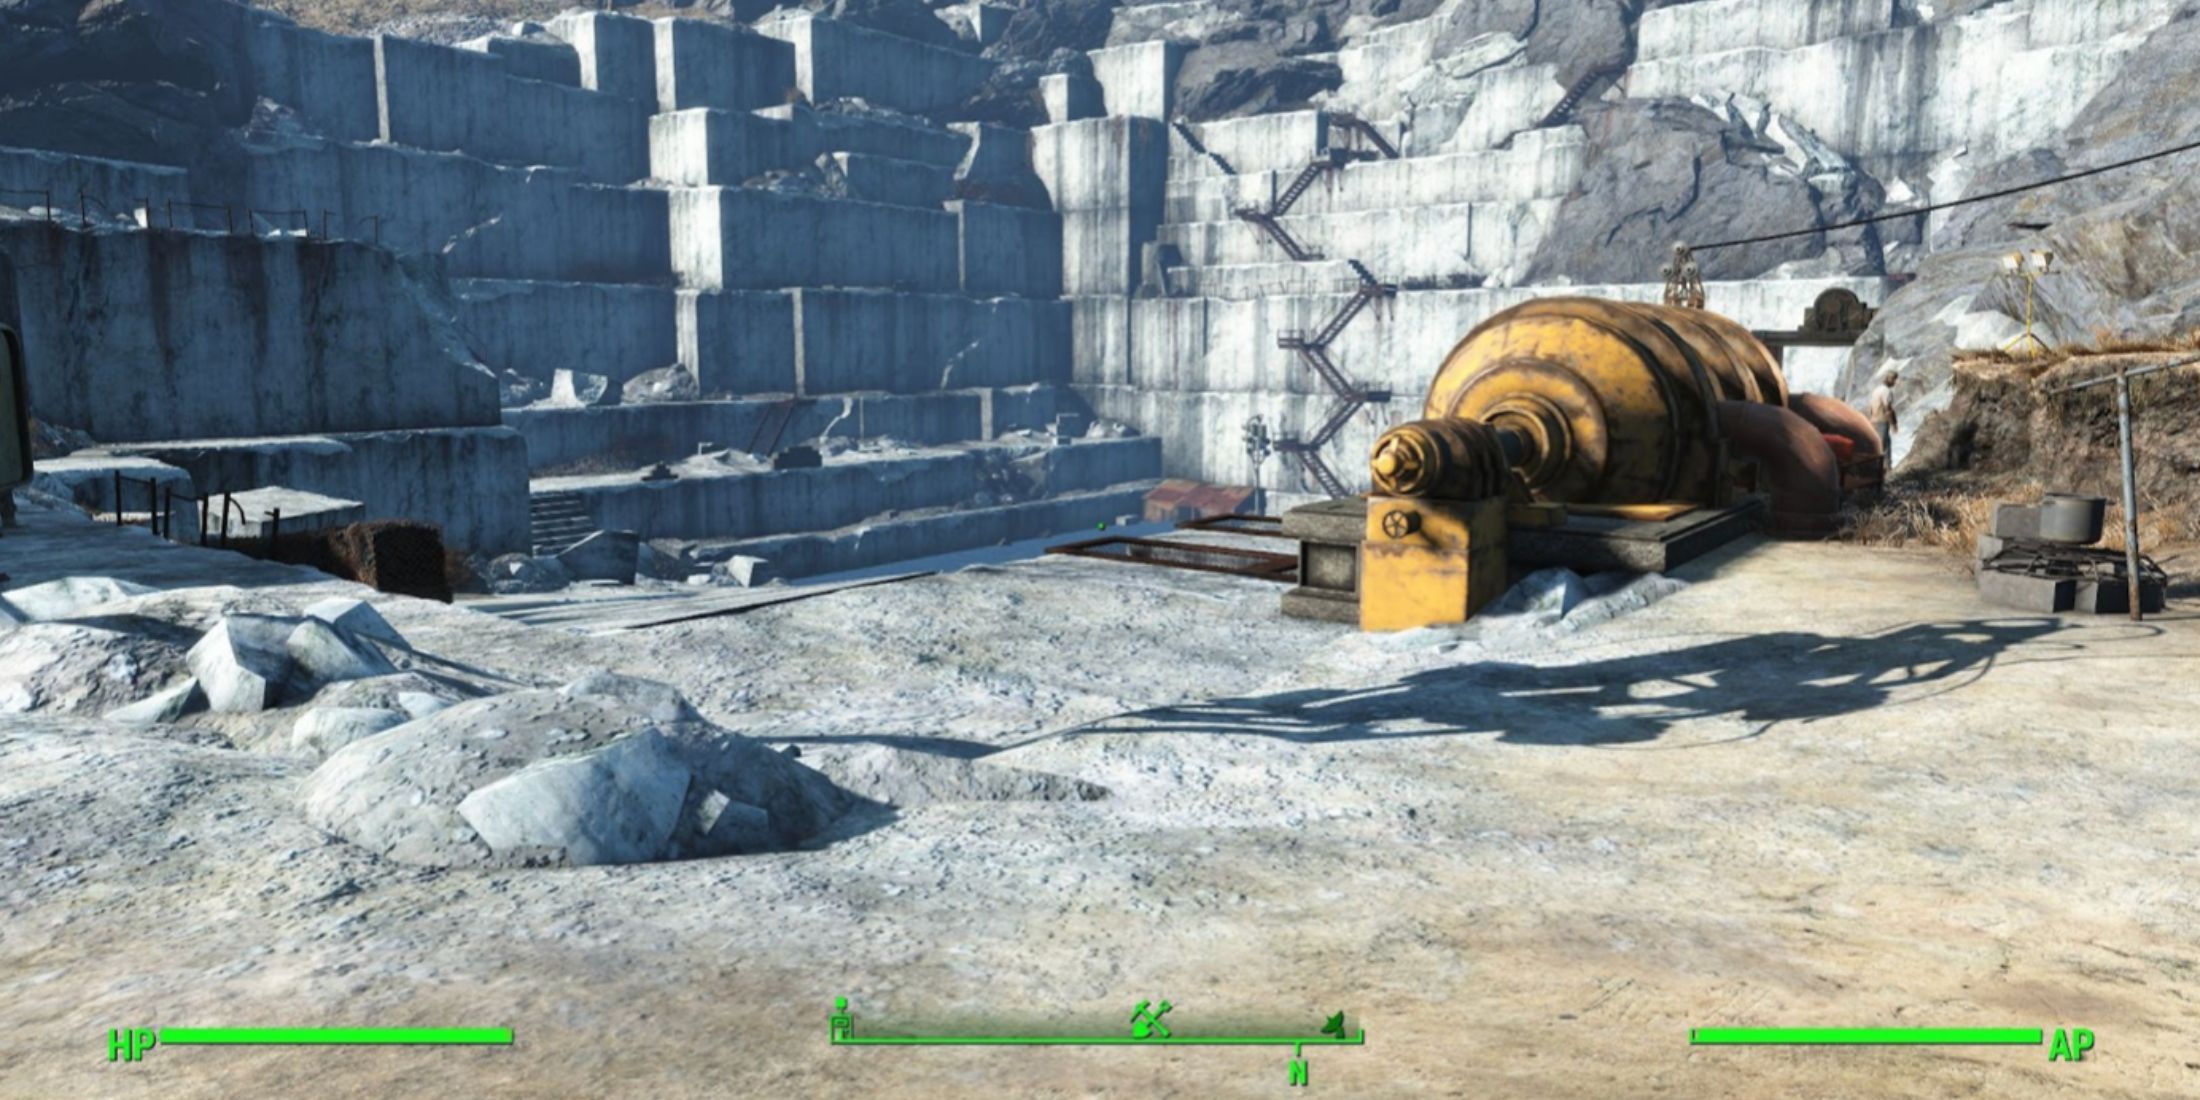 The Thicket Excavations in Fallout 4